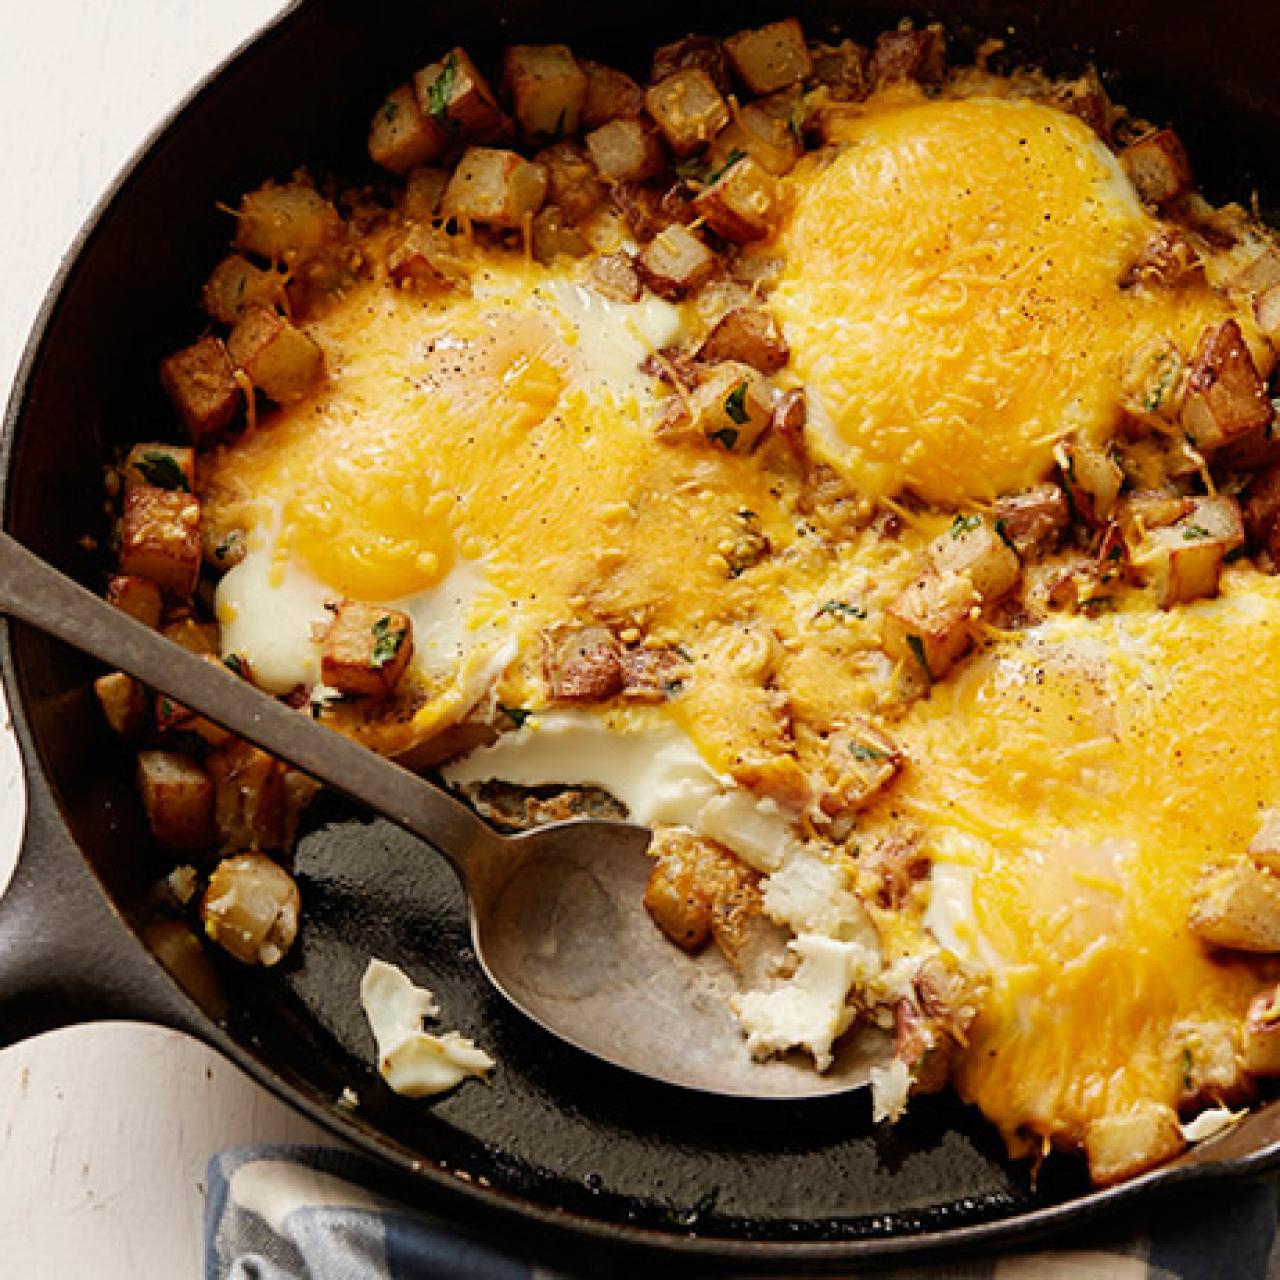 https://food.fnr.sndimg.com/content/dam/images/food/fullset/2013/12/9/0/FNK_Baked-Eggs-with-Farmhouse-Cheddar-and-Potatoes_s4x3.jpg.rend.hgtvcom.1280.1280.suffix/1387414276409.jpeg